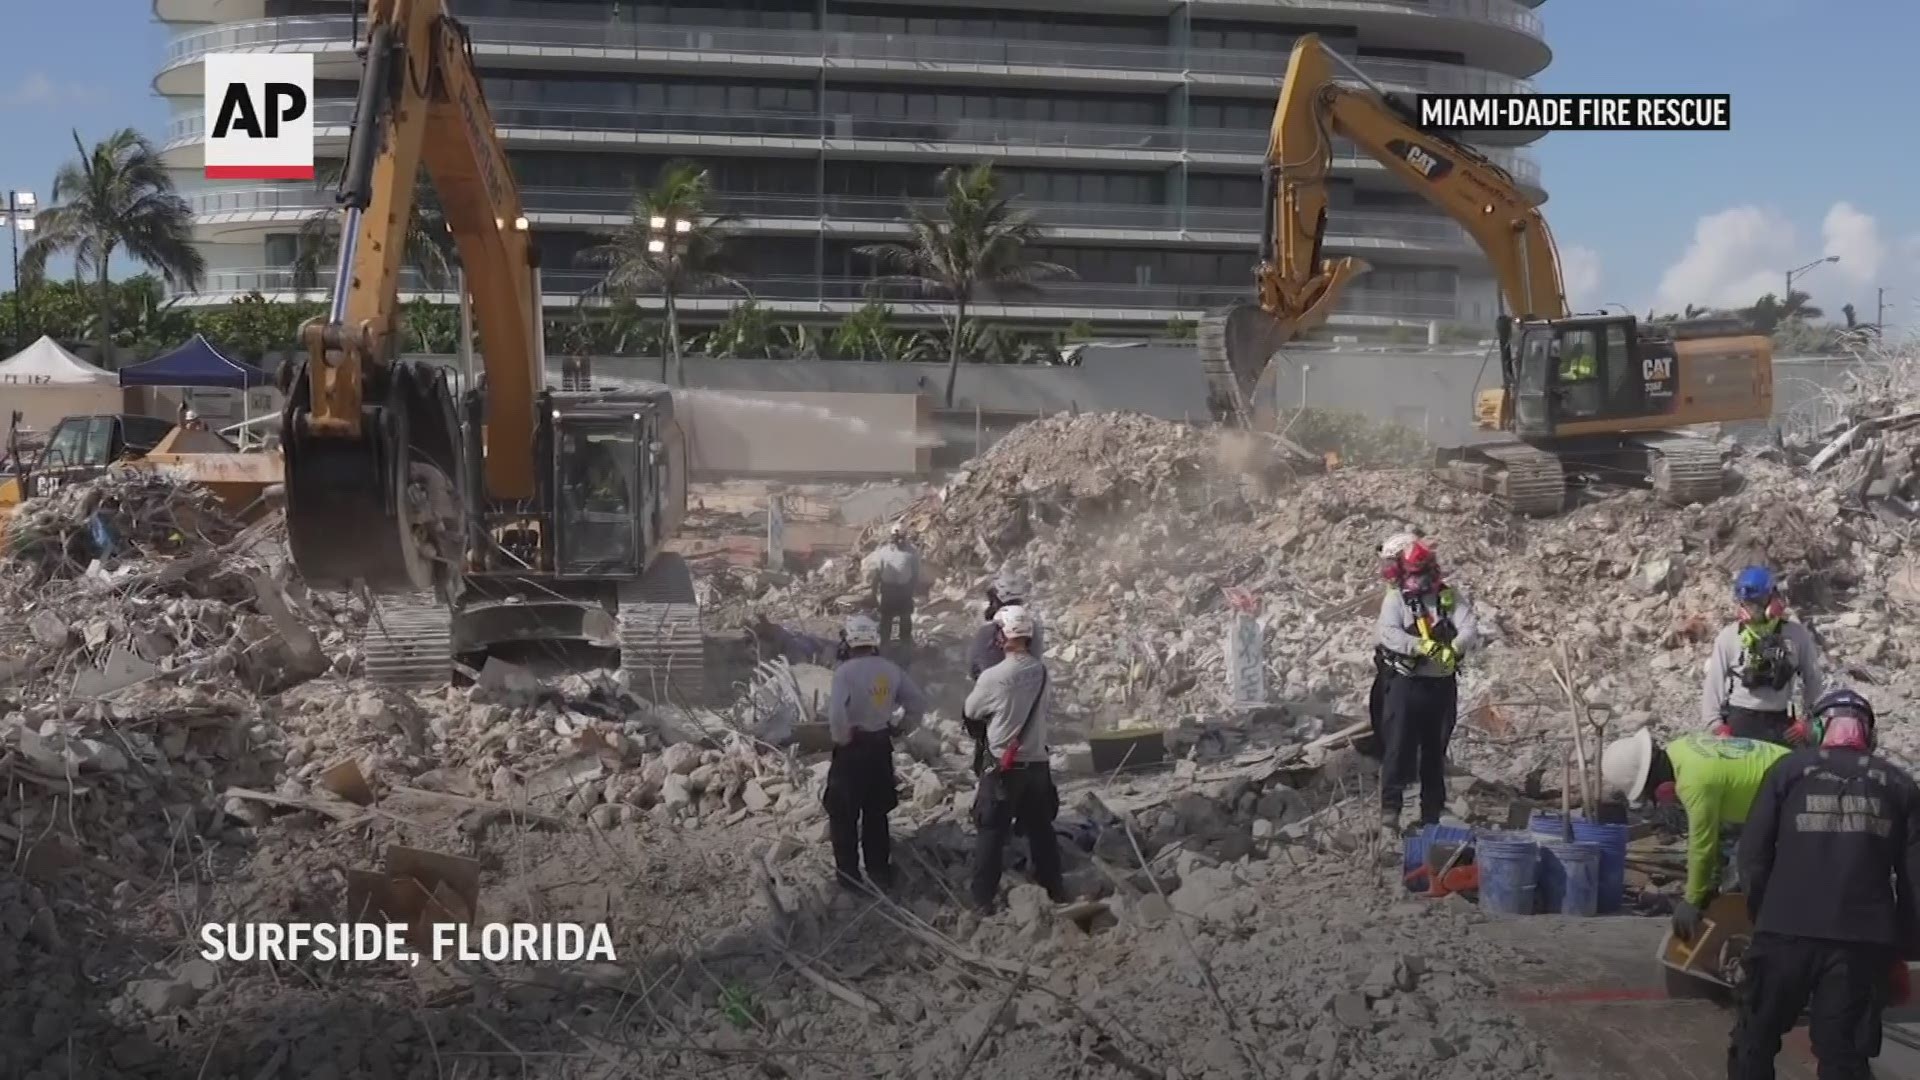 The search continues at the site of the condominium collapse in Surfside, Florida. As of Monday, at least 94 people are dead and some 22 people are still missing.